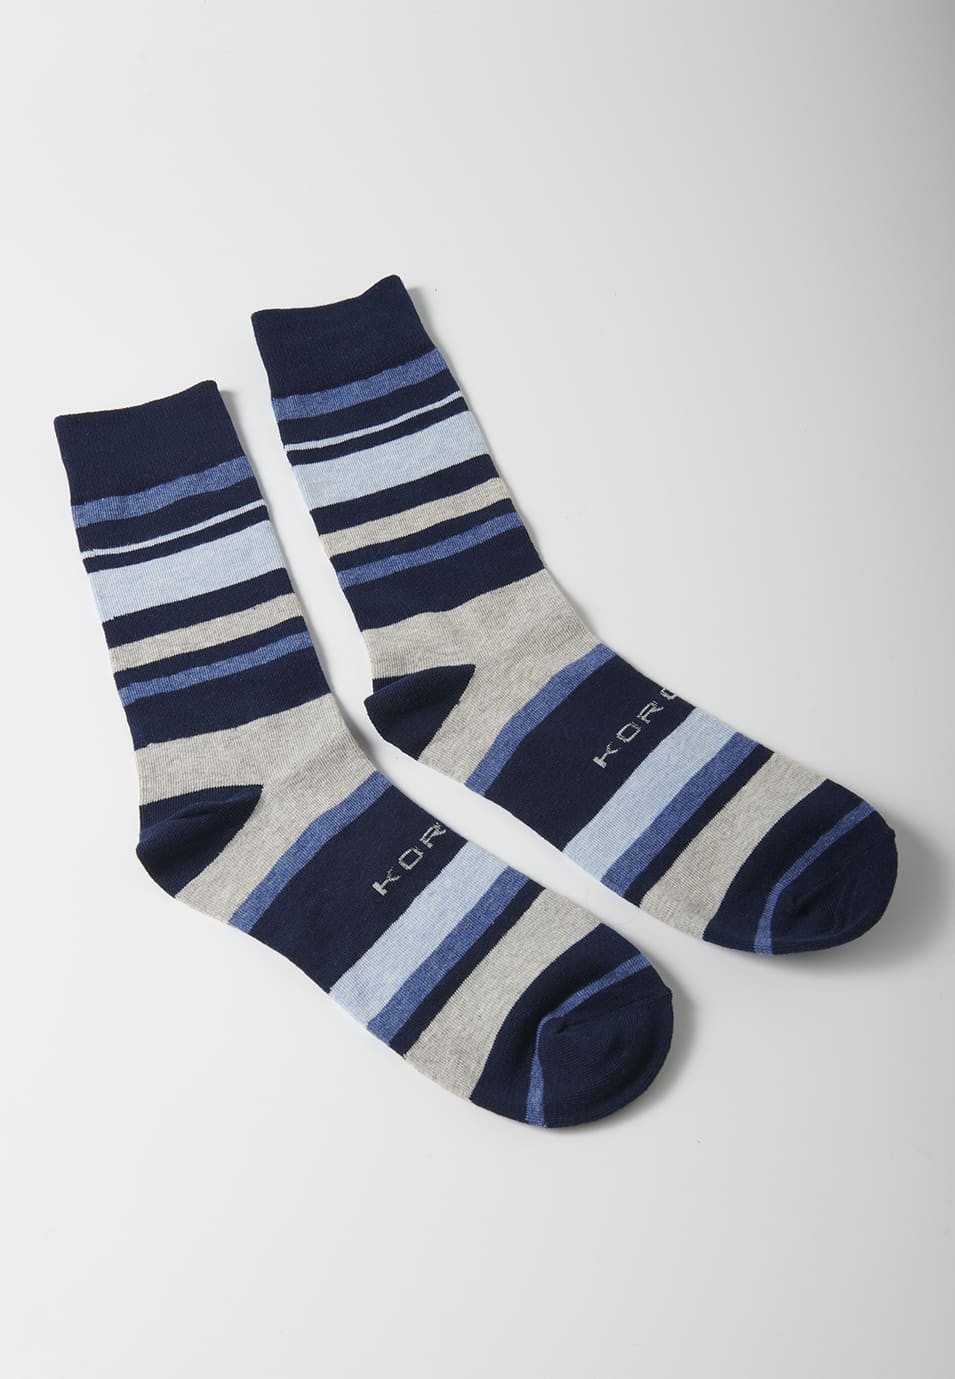 Pack of 7 socks in different colors over the ankle for Men